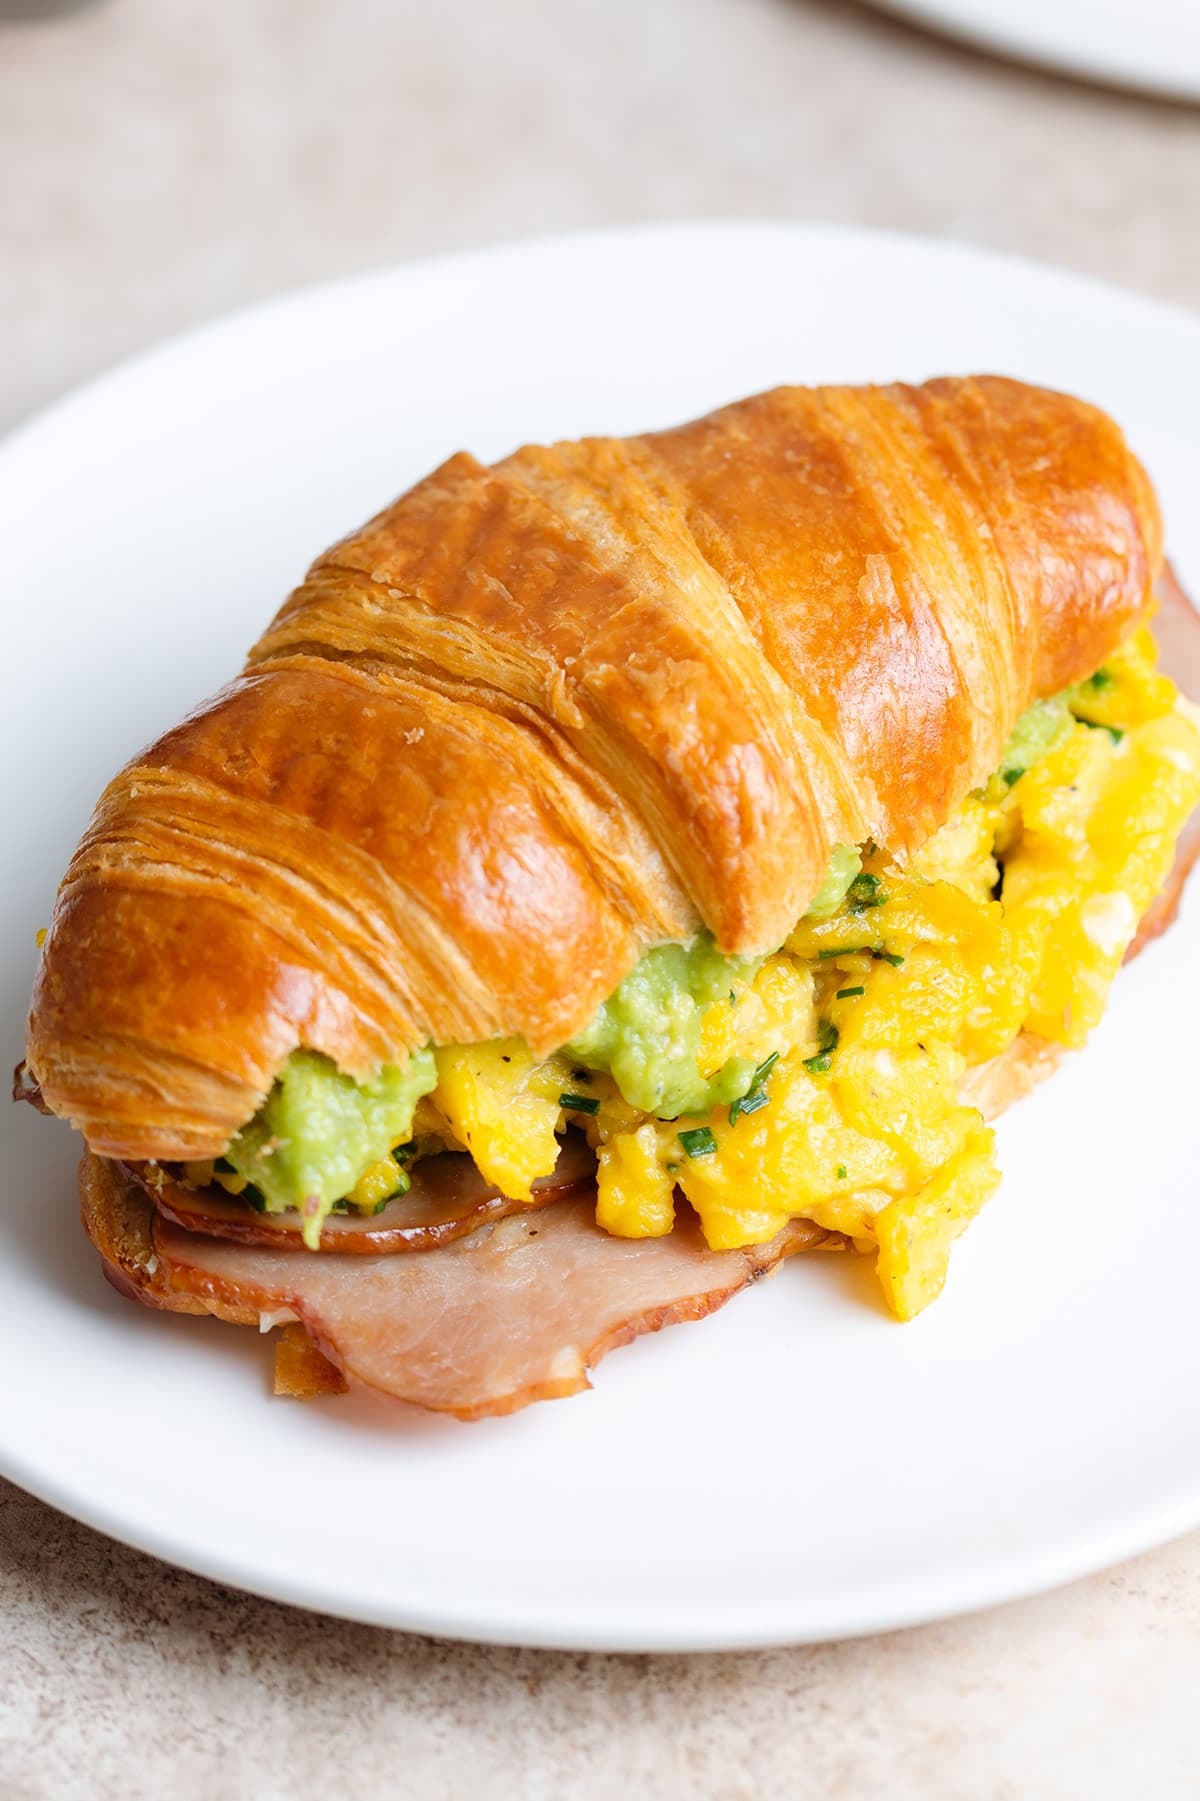 A toasted croissant filled with scrambled eggs, turkey bacon, and avocado on a white plate.